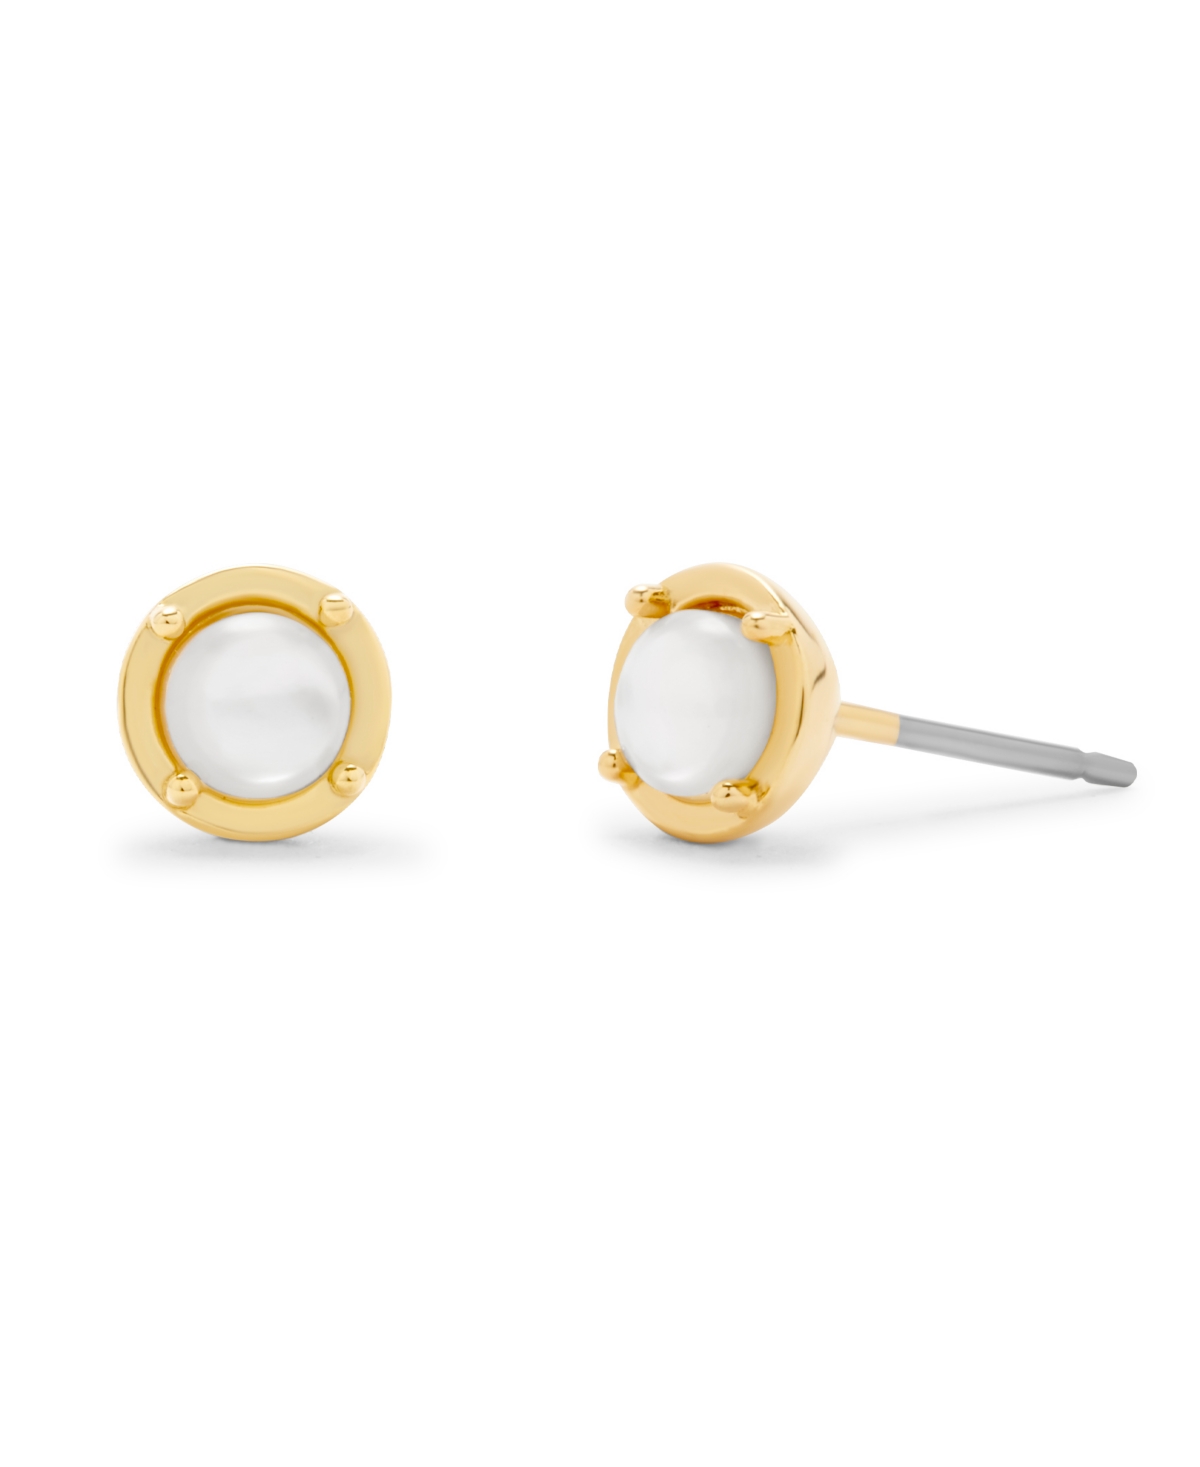 Mother of Imitation Pearl Kate Earrings - Gold Platted